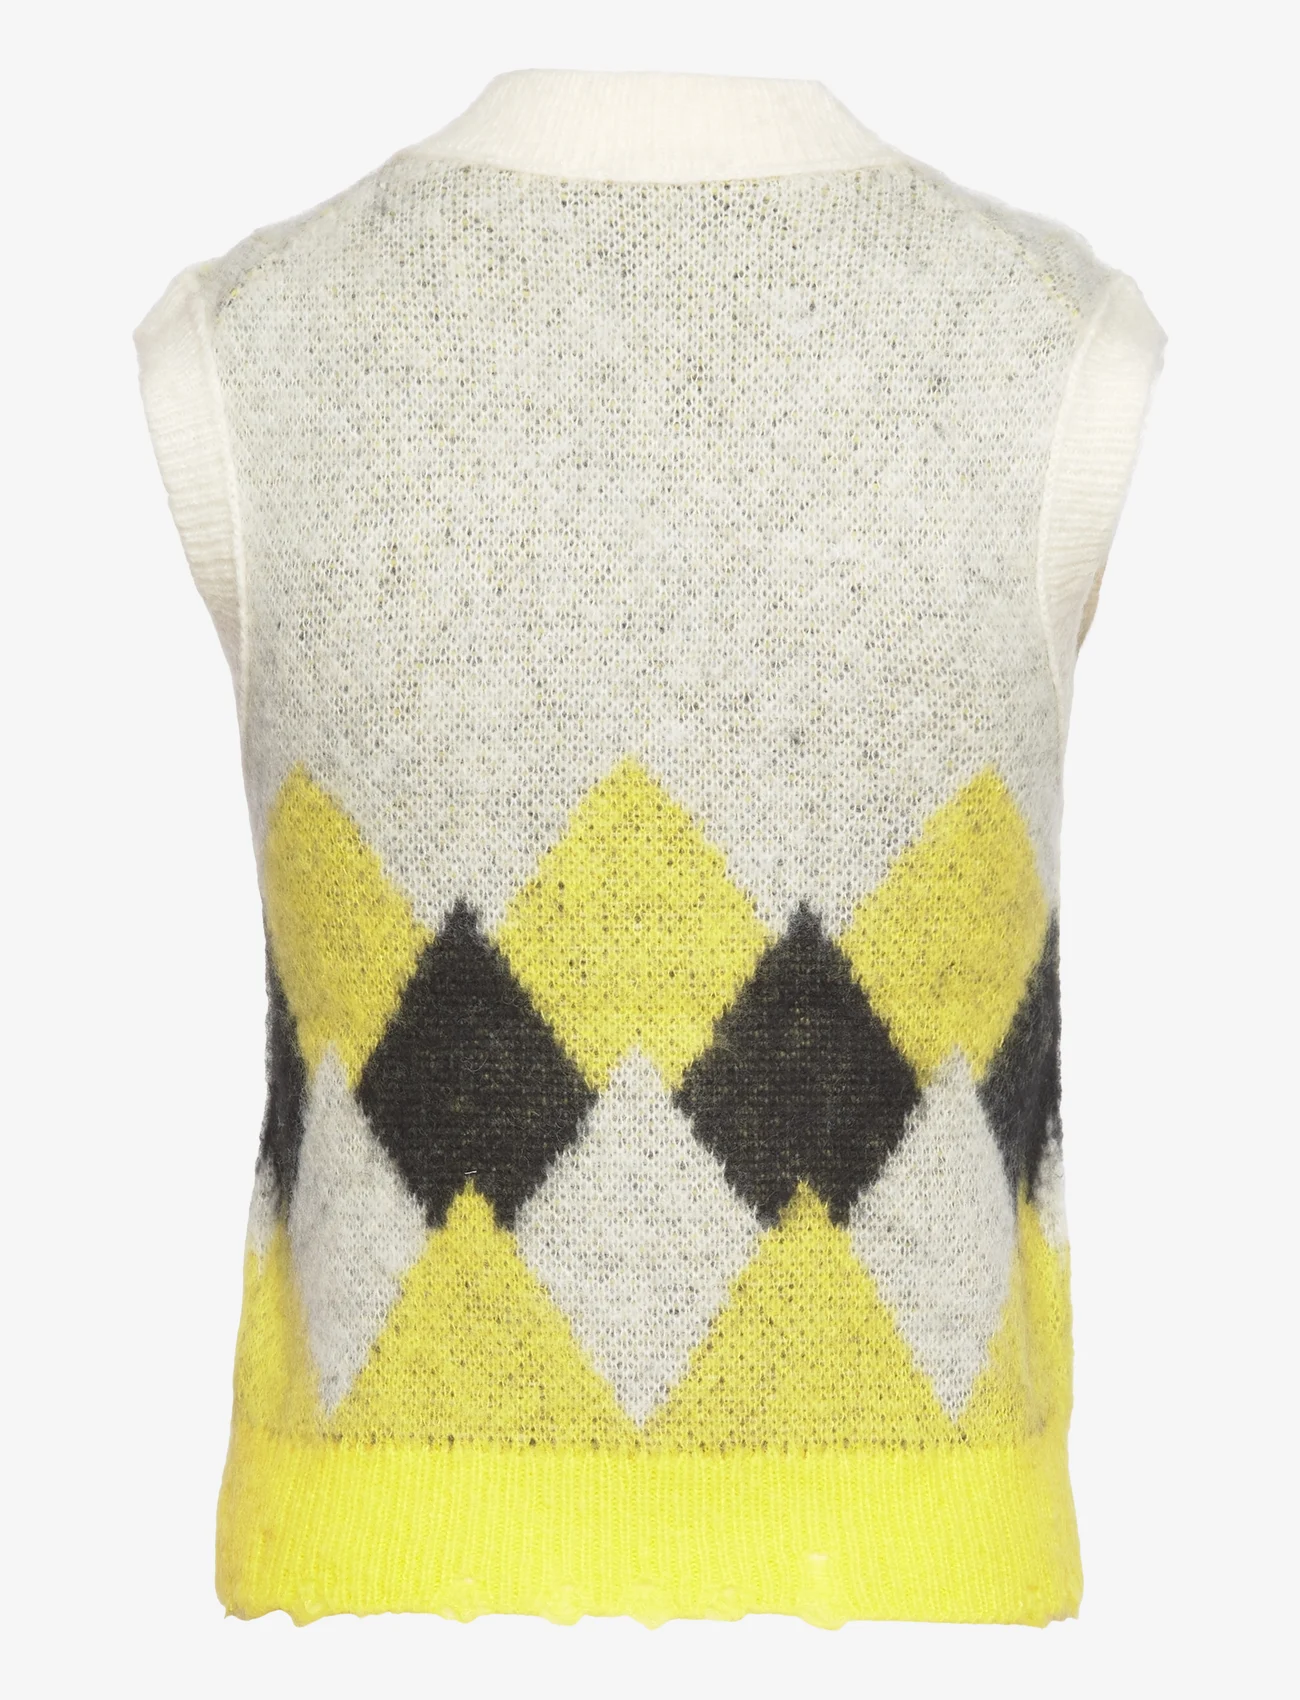 AllSaints - HOVE TANK - knitted vests - white/yellow/black - 1